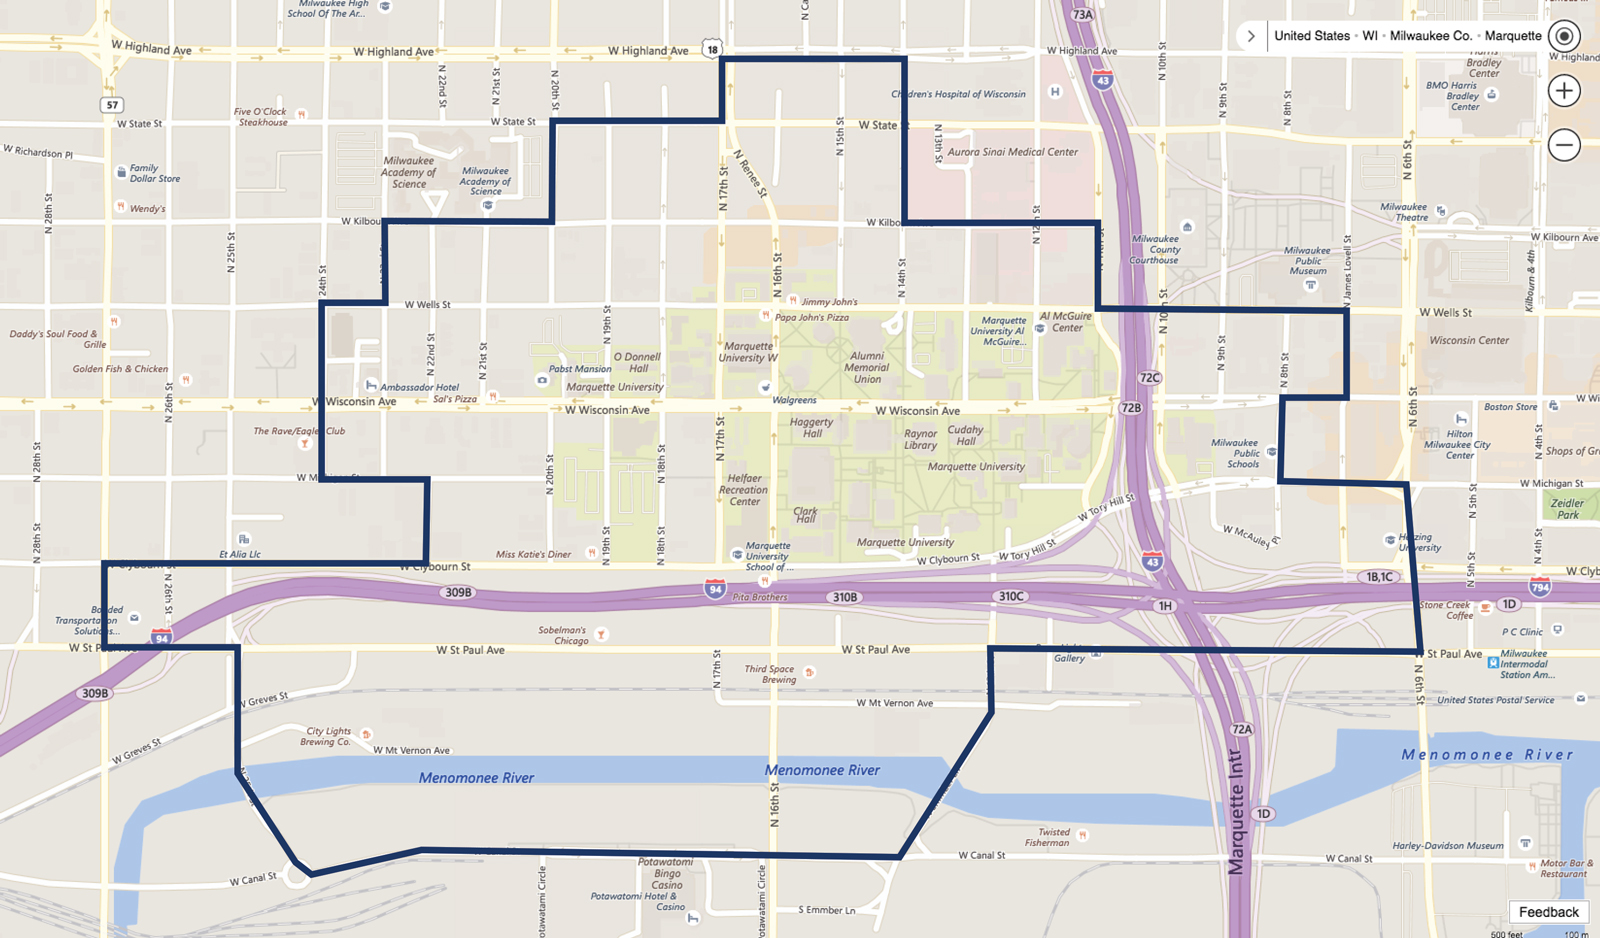 Campus map showing patrol boundaries of Marquette University Police Department